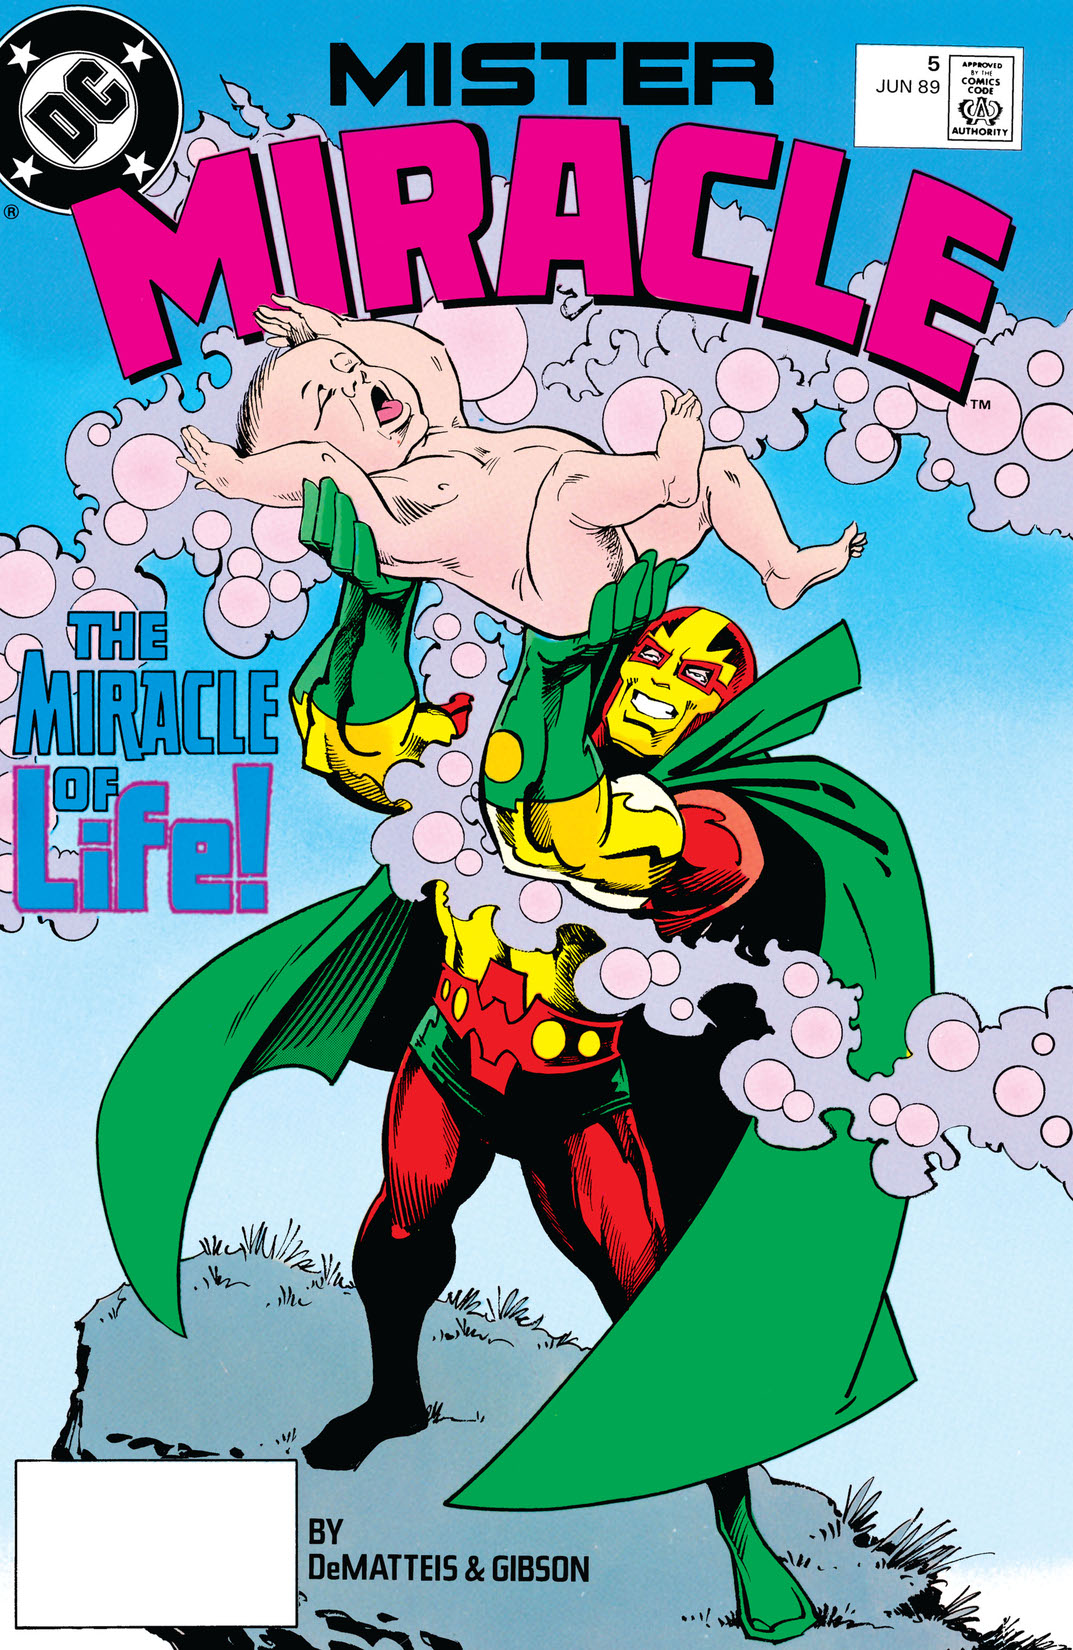 Mister Miracle (1988-) #5 preview images